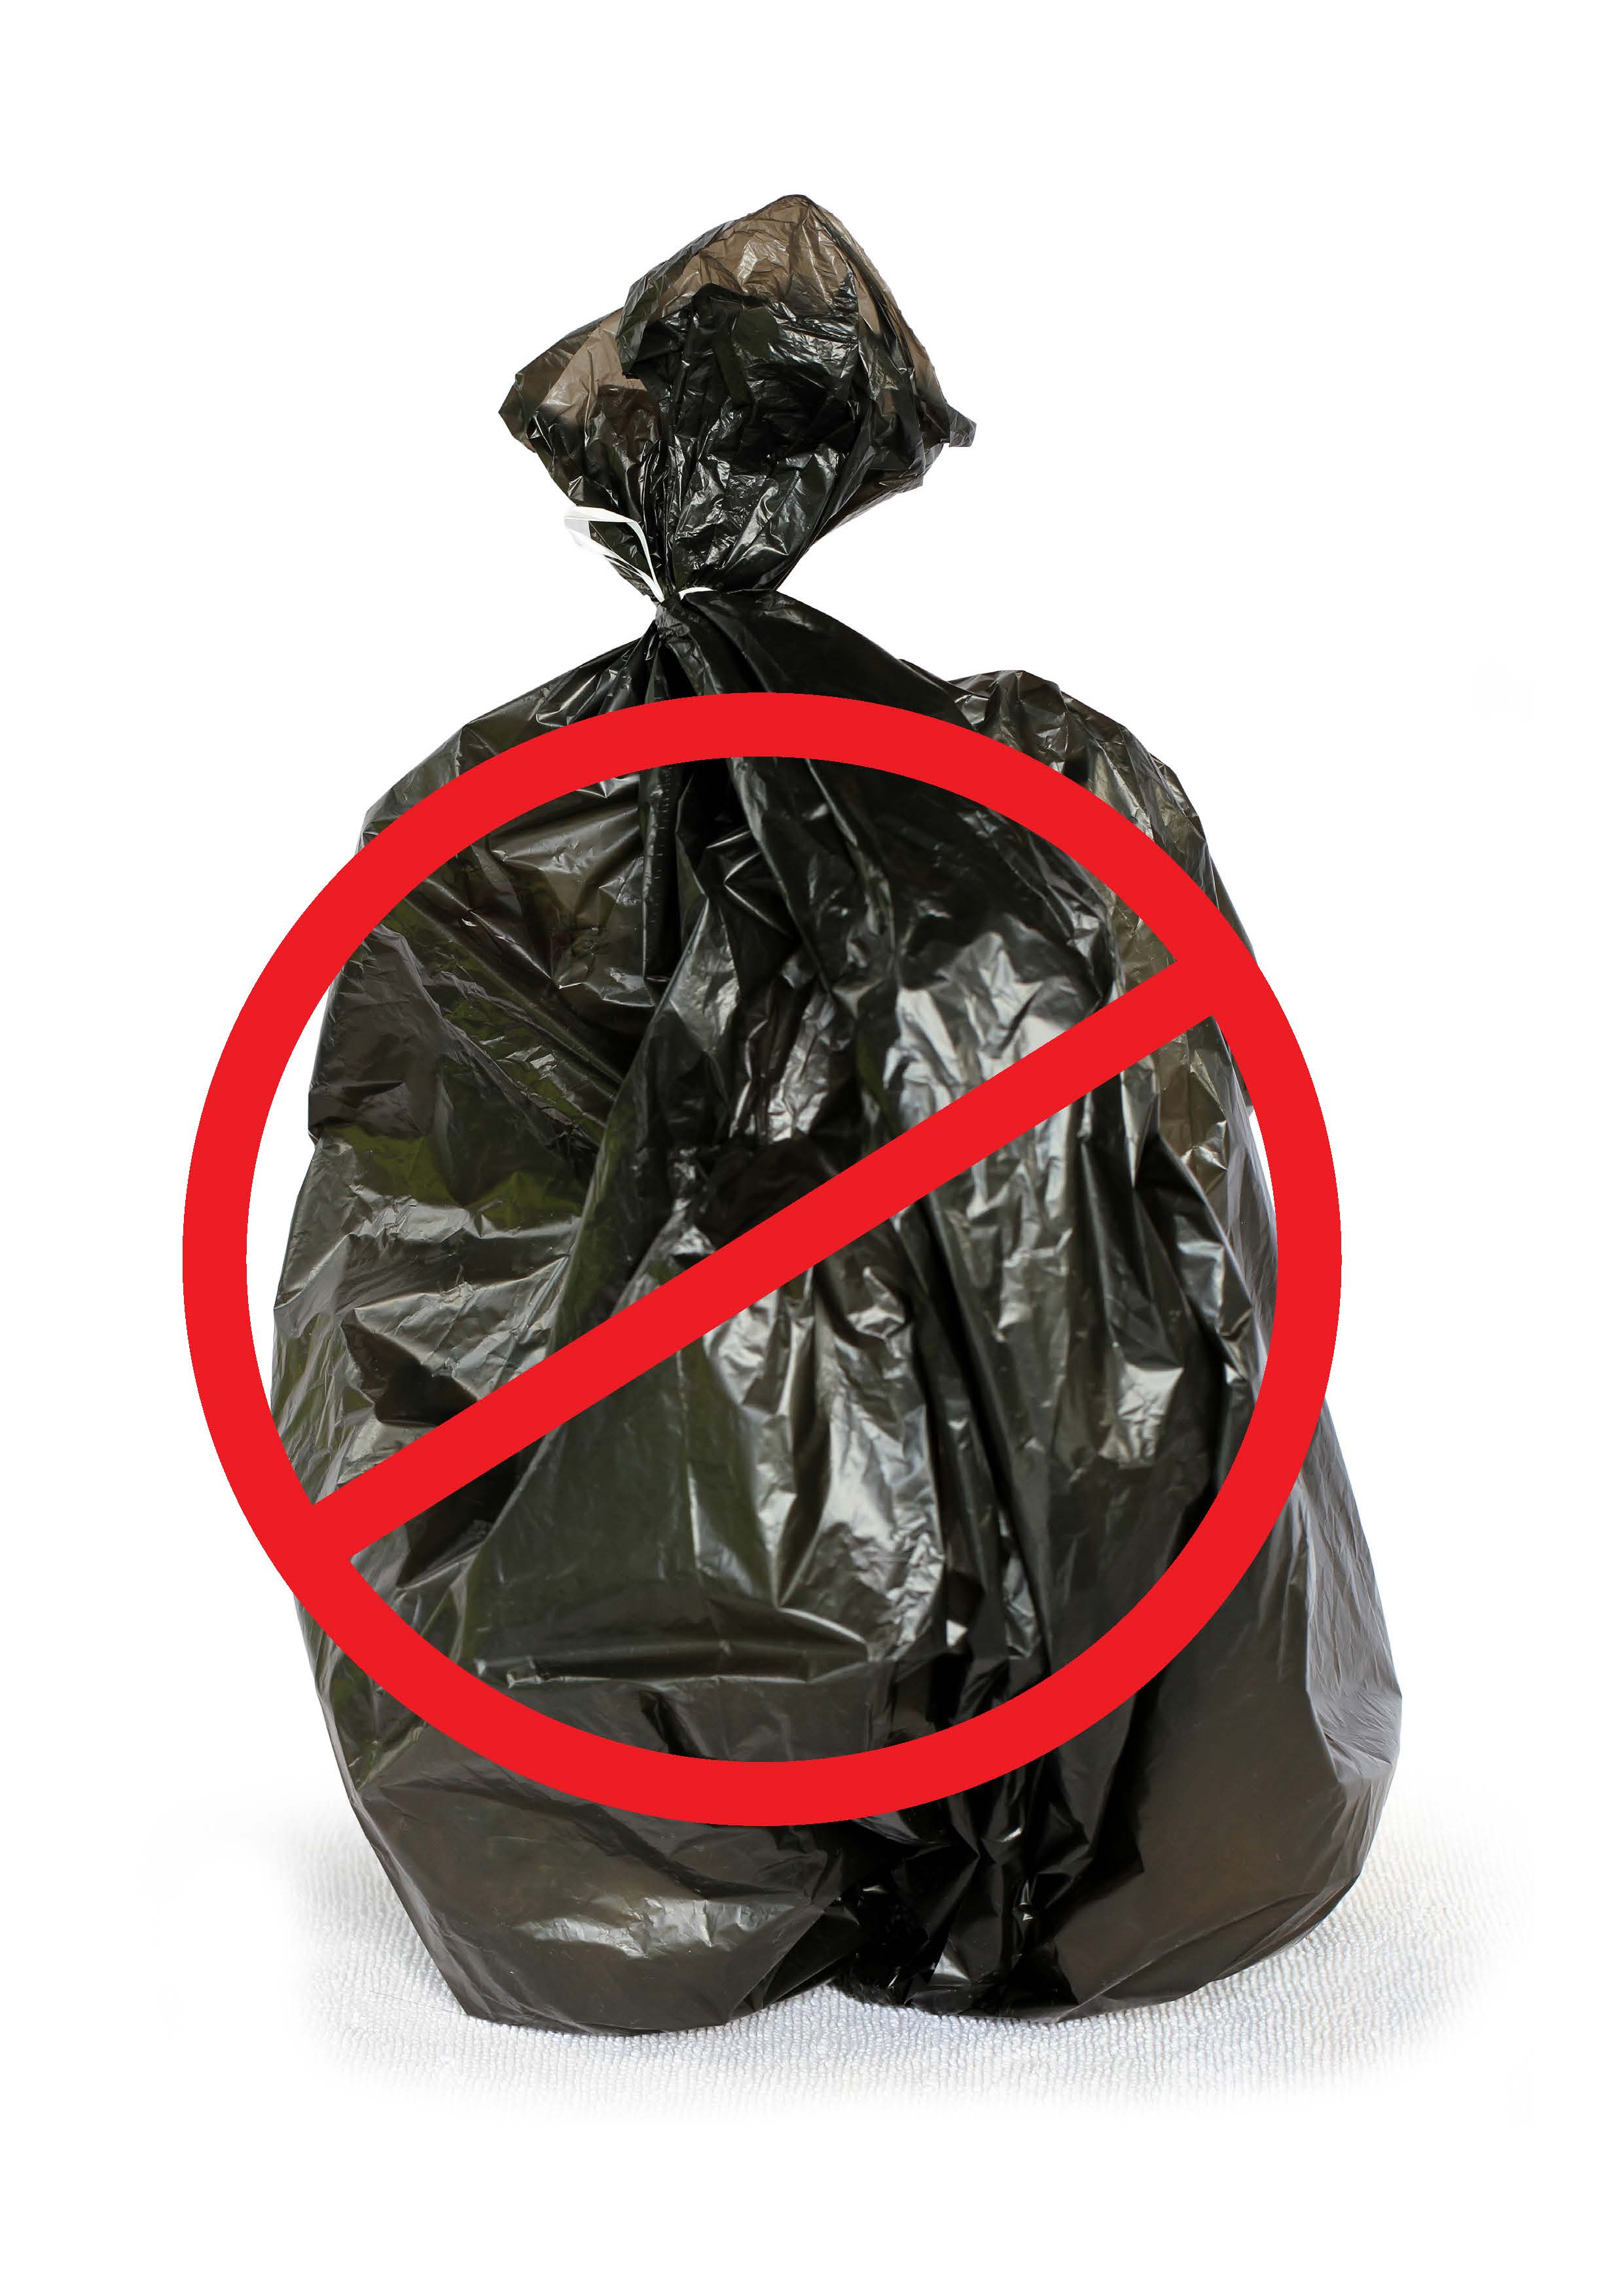 What Types of Waste Don't Go in Red Bags?